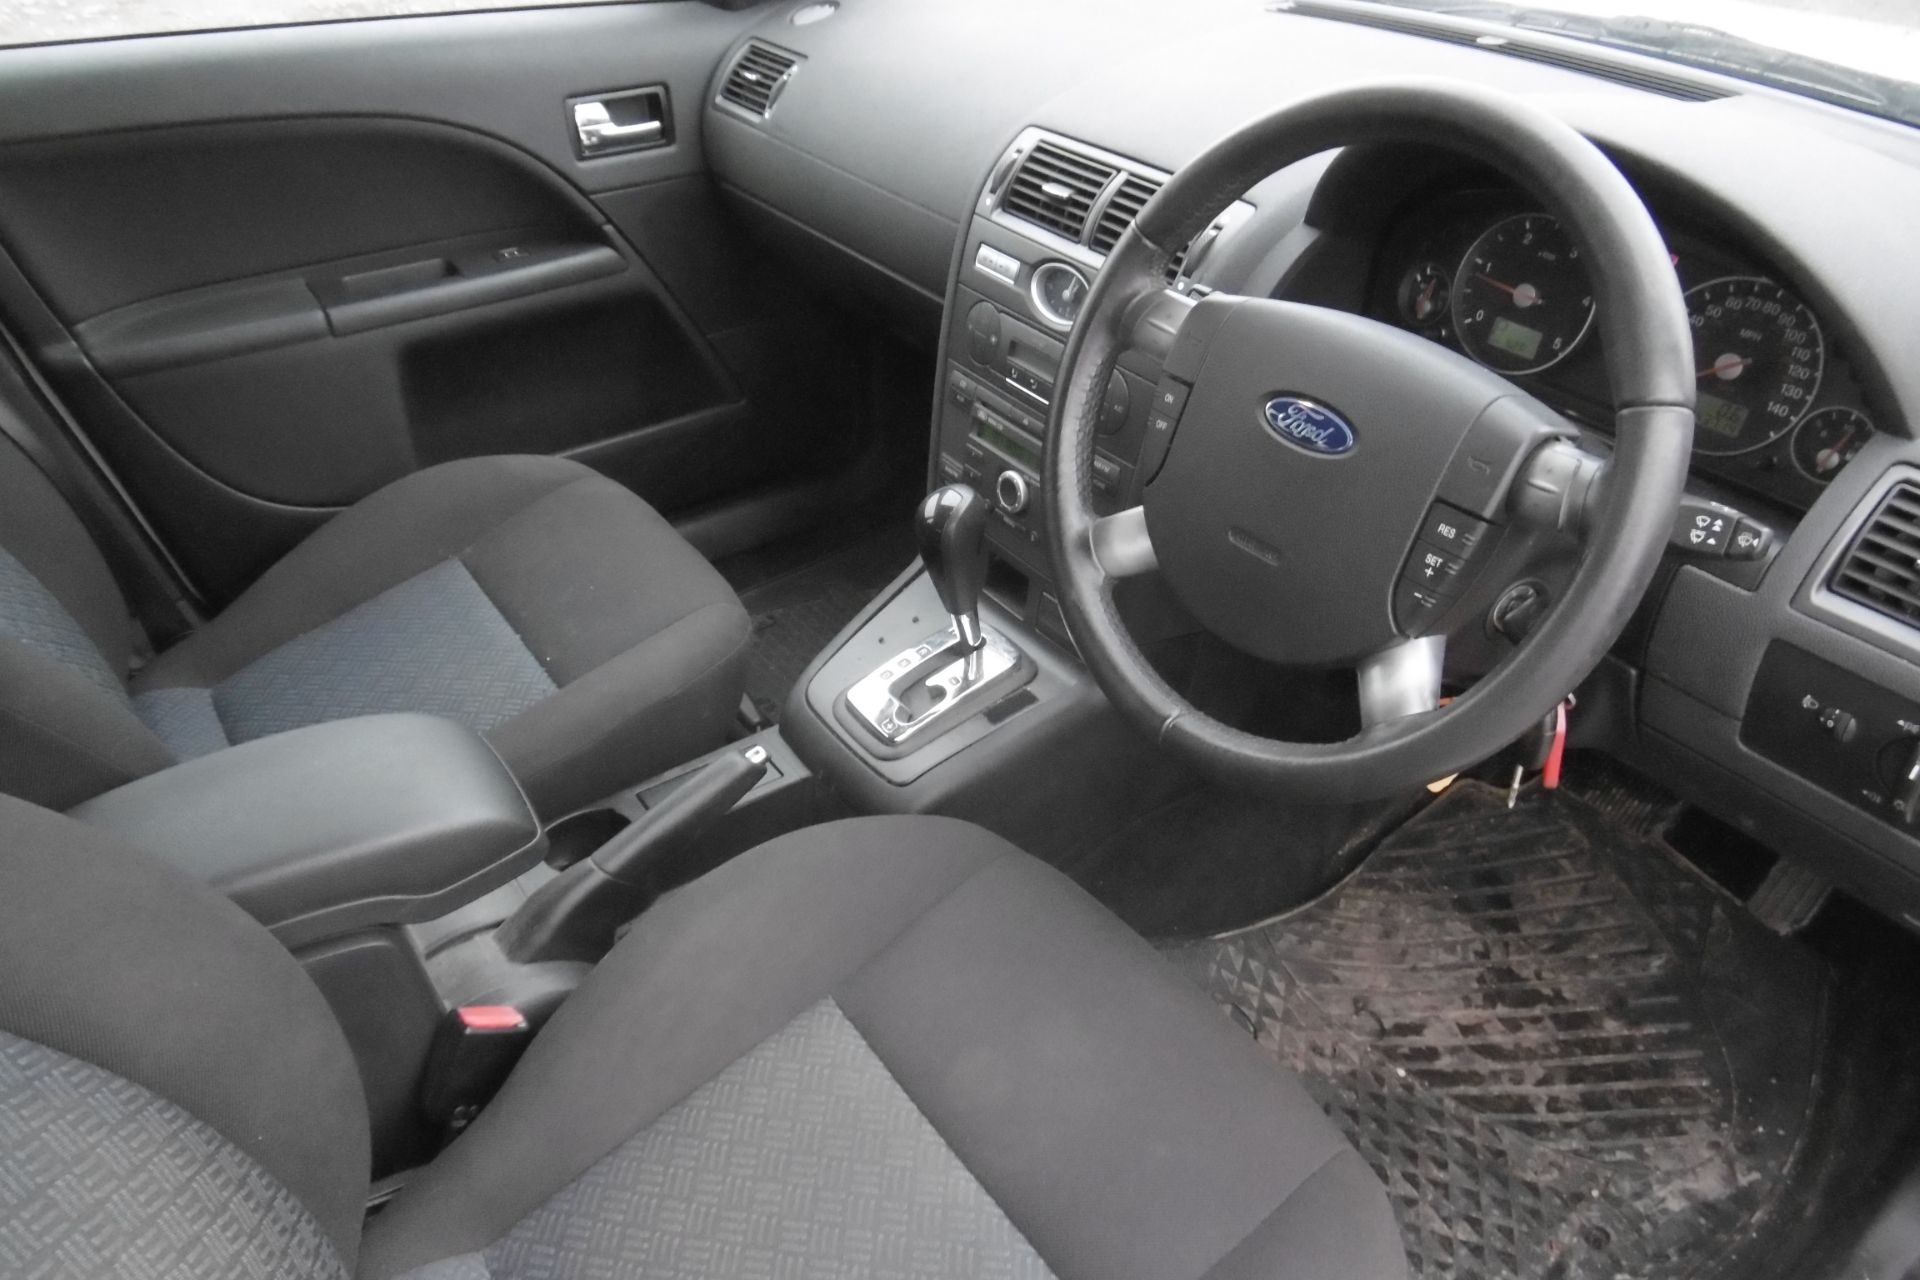 Ford Mondeo 2.0TDCi Estate - Image 12 of 16